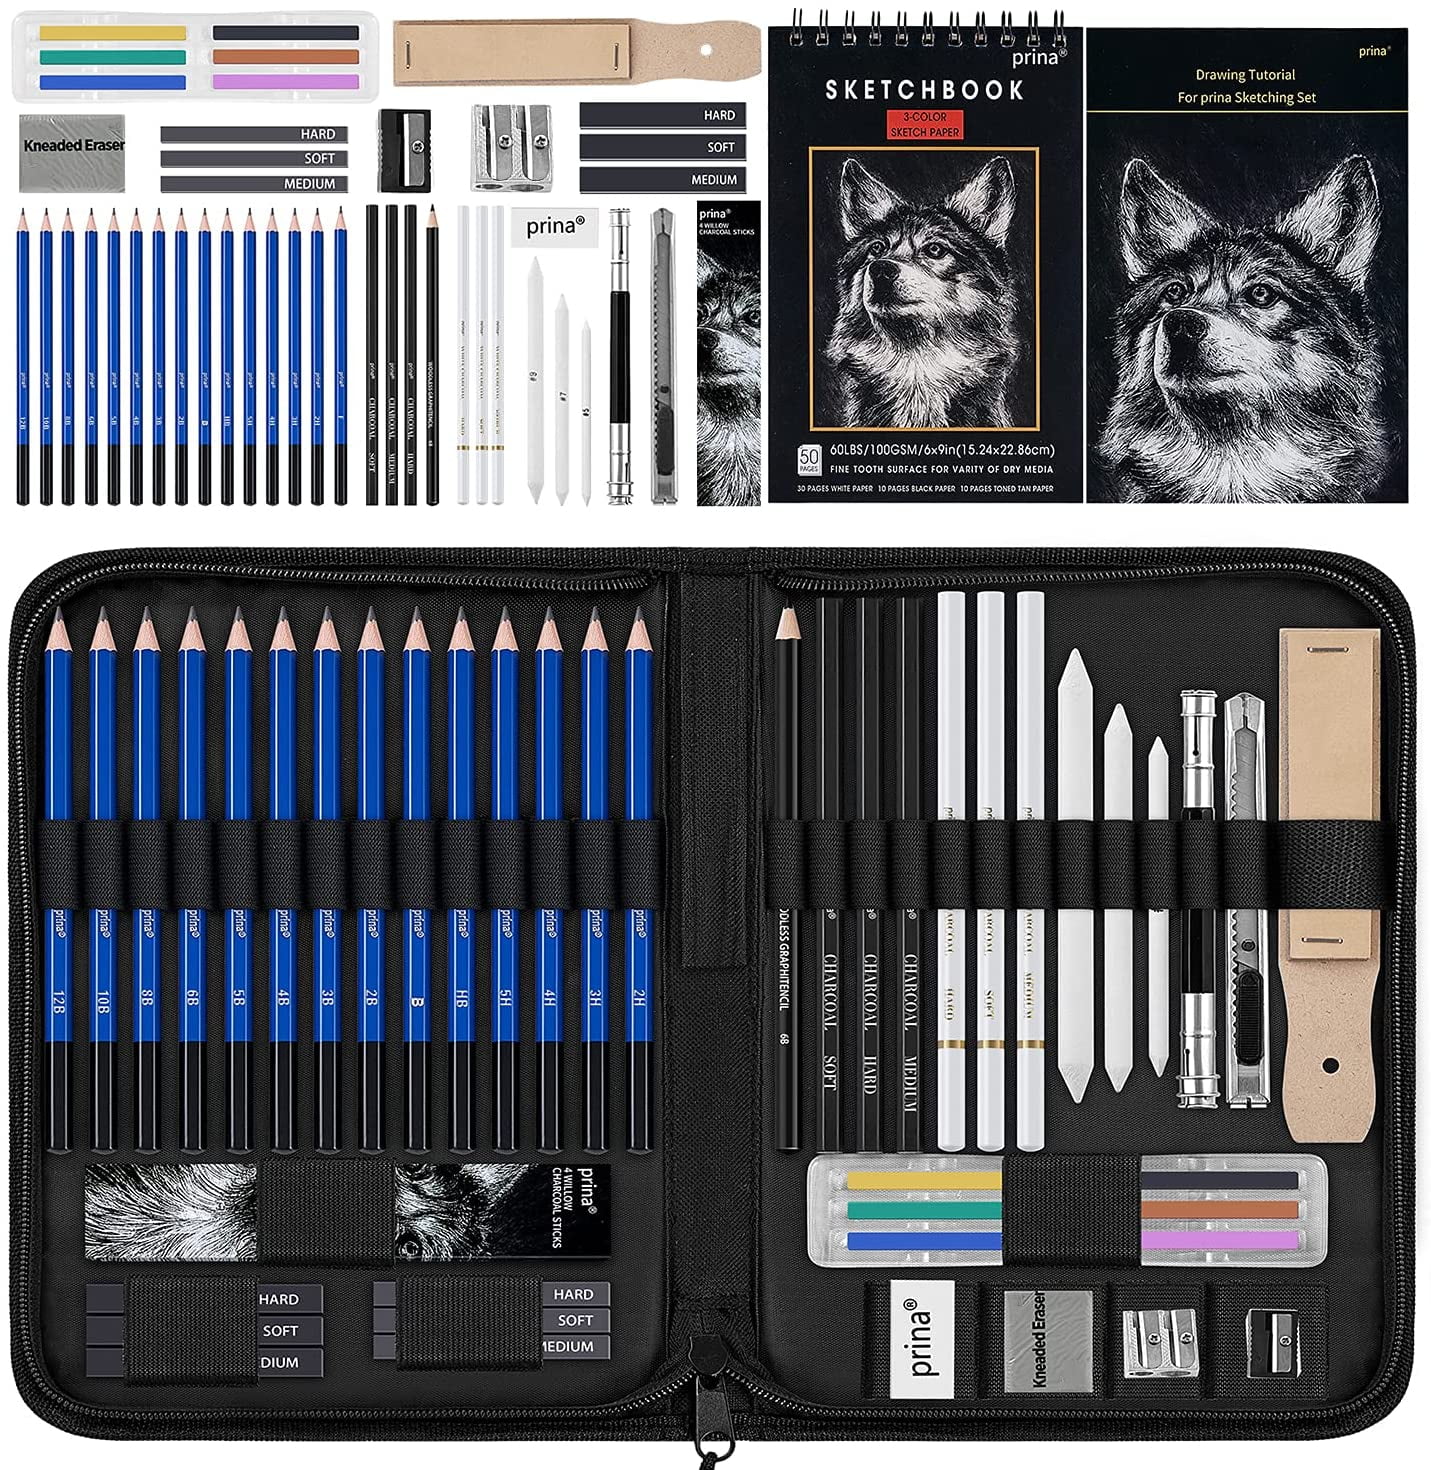 Graphite and Charcoal Sticks Art Kit Supplies for Kids,Teens and Adults Drawing Sketching Pencils Set 